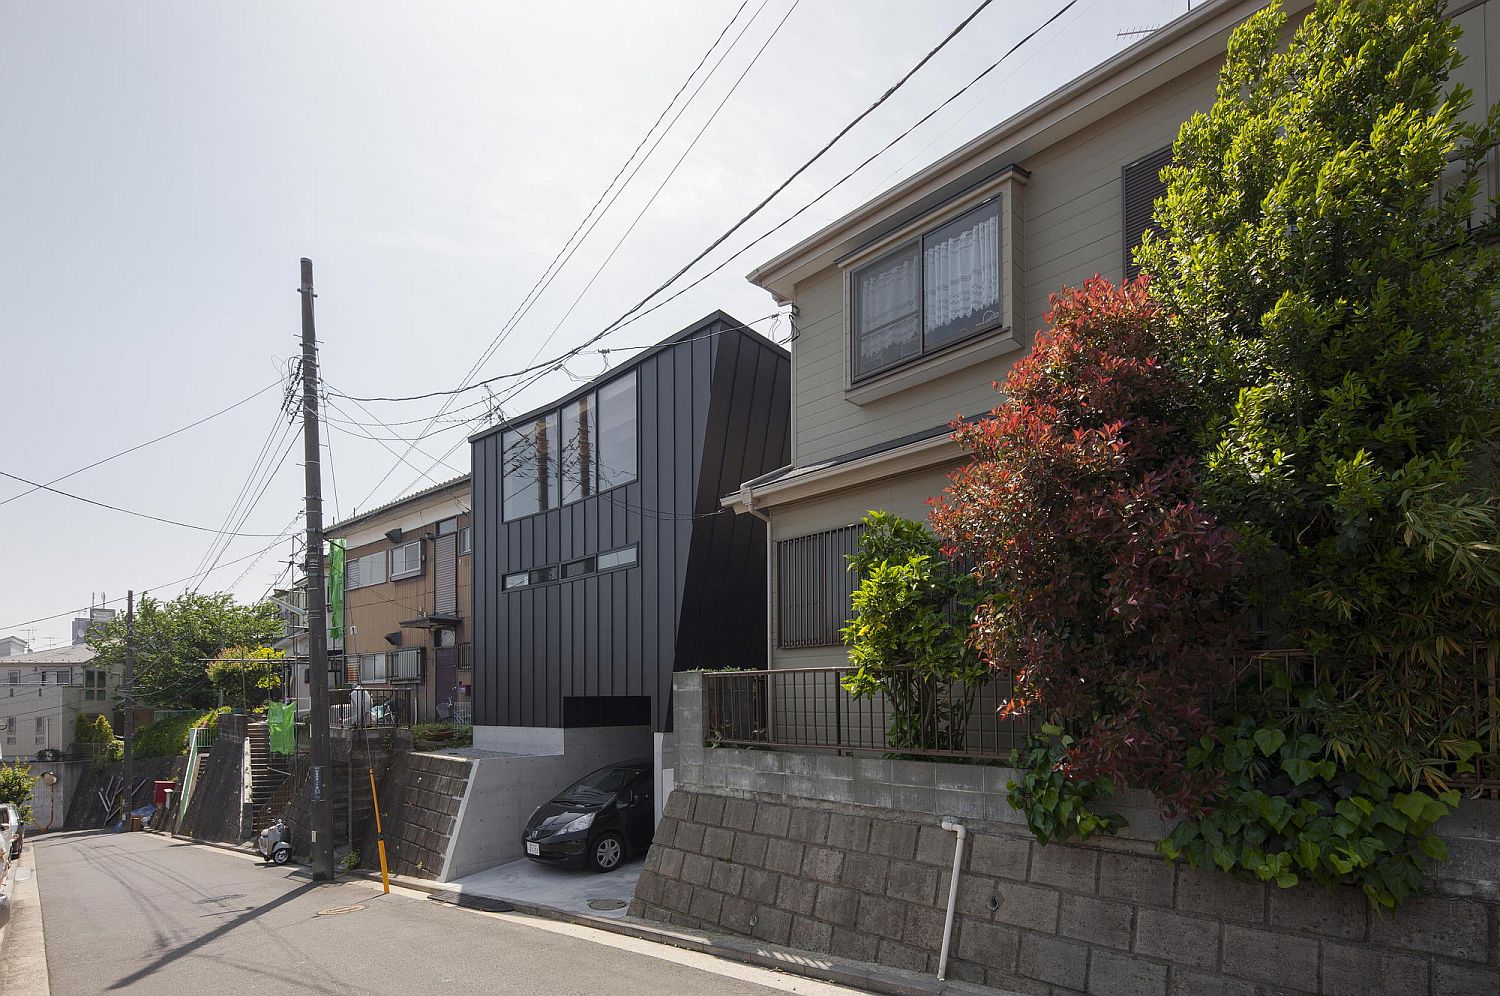 Contemporary Japanese home with a dark exterior and oblique walls